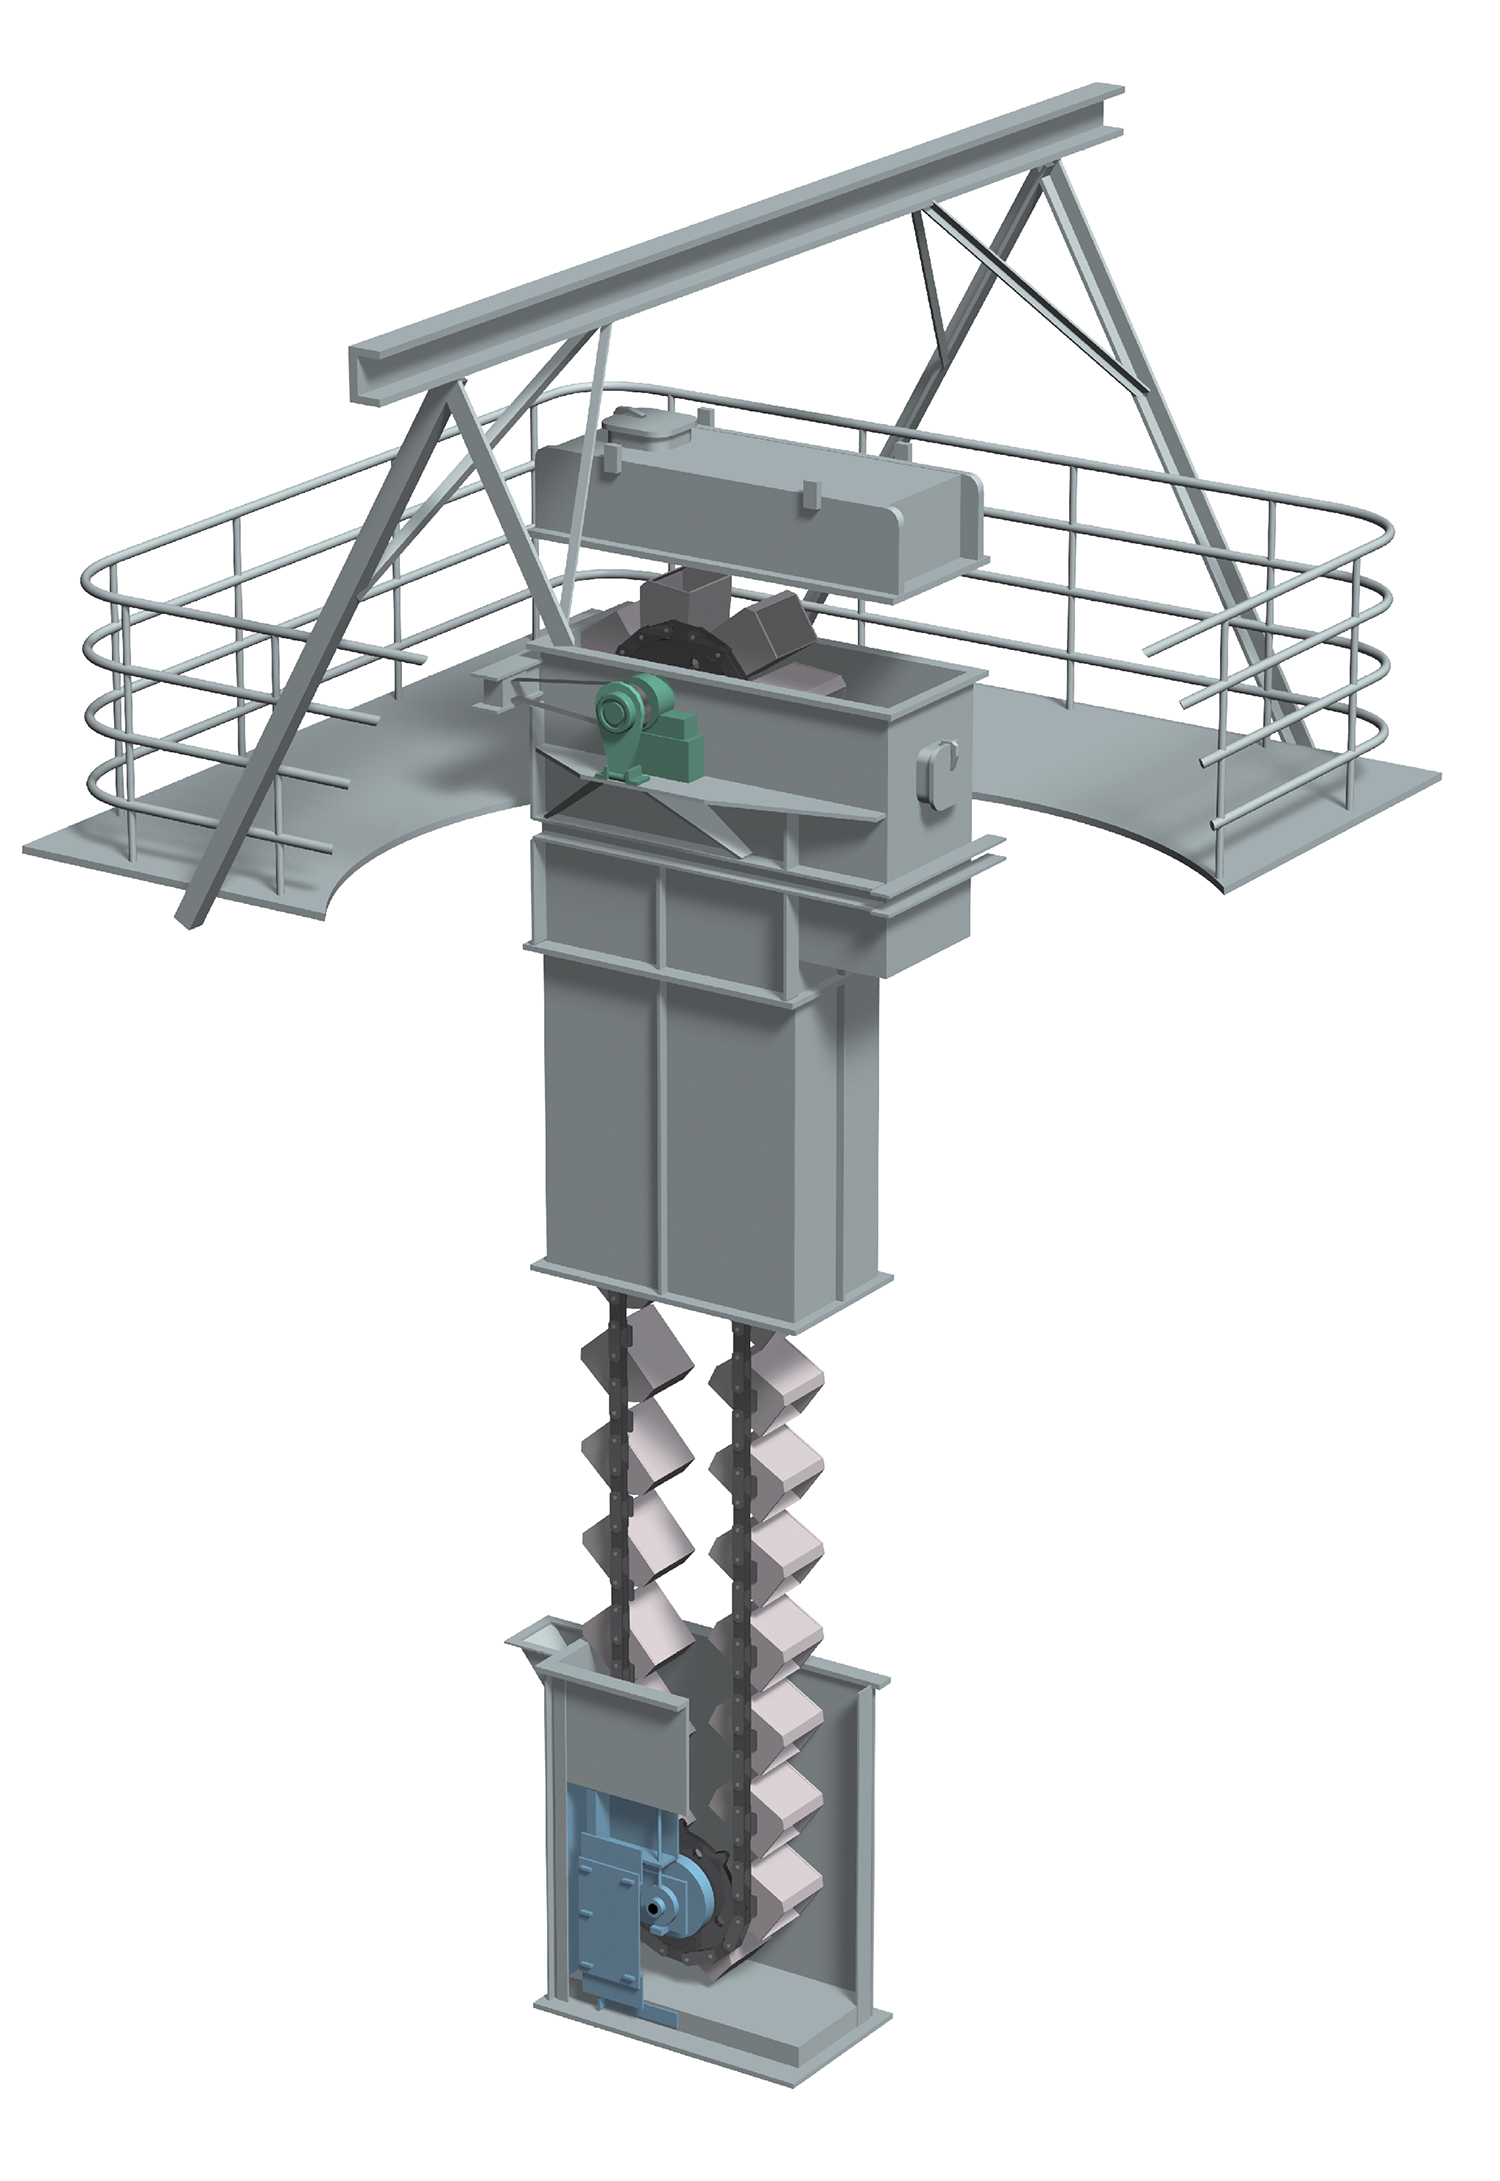 Chain bucket elevators are used to transport bulk materials vertically. Demanding environments like these often challenge system reliability and require unique, innovative chain solutions.